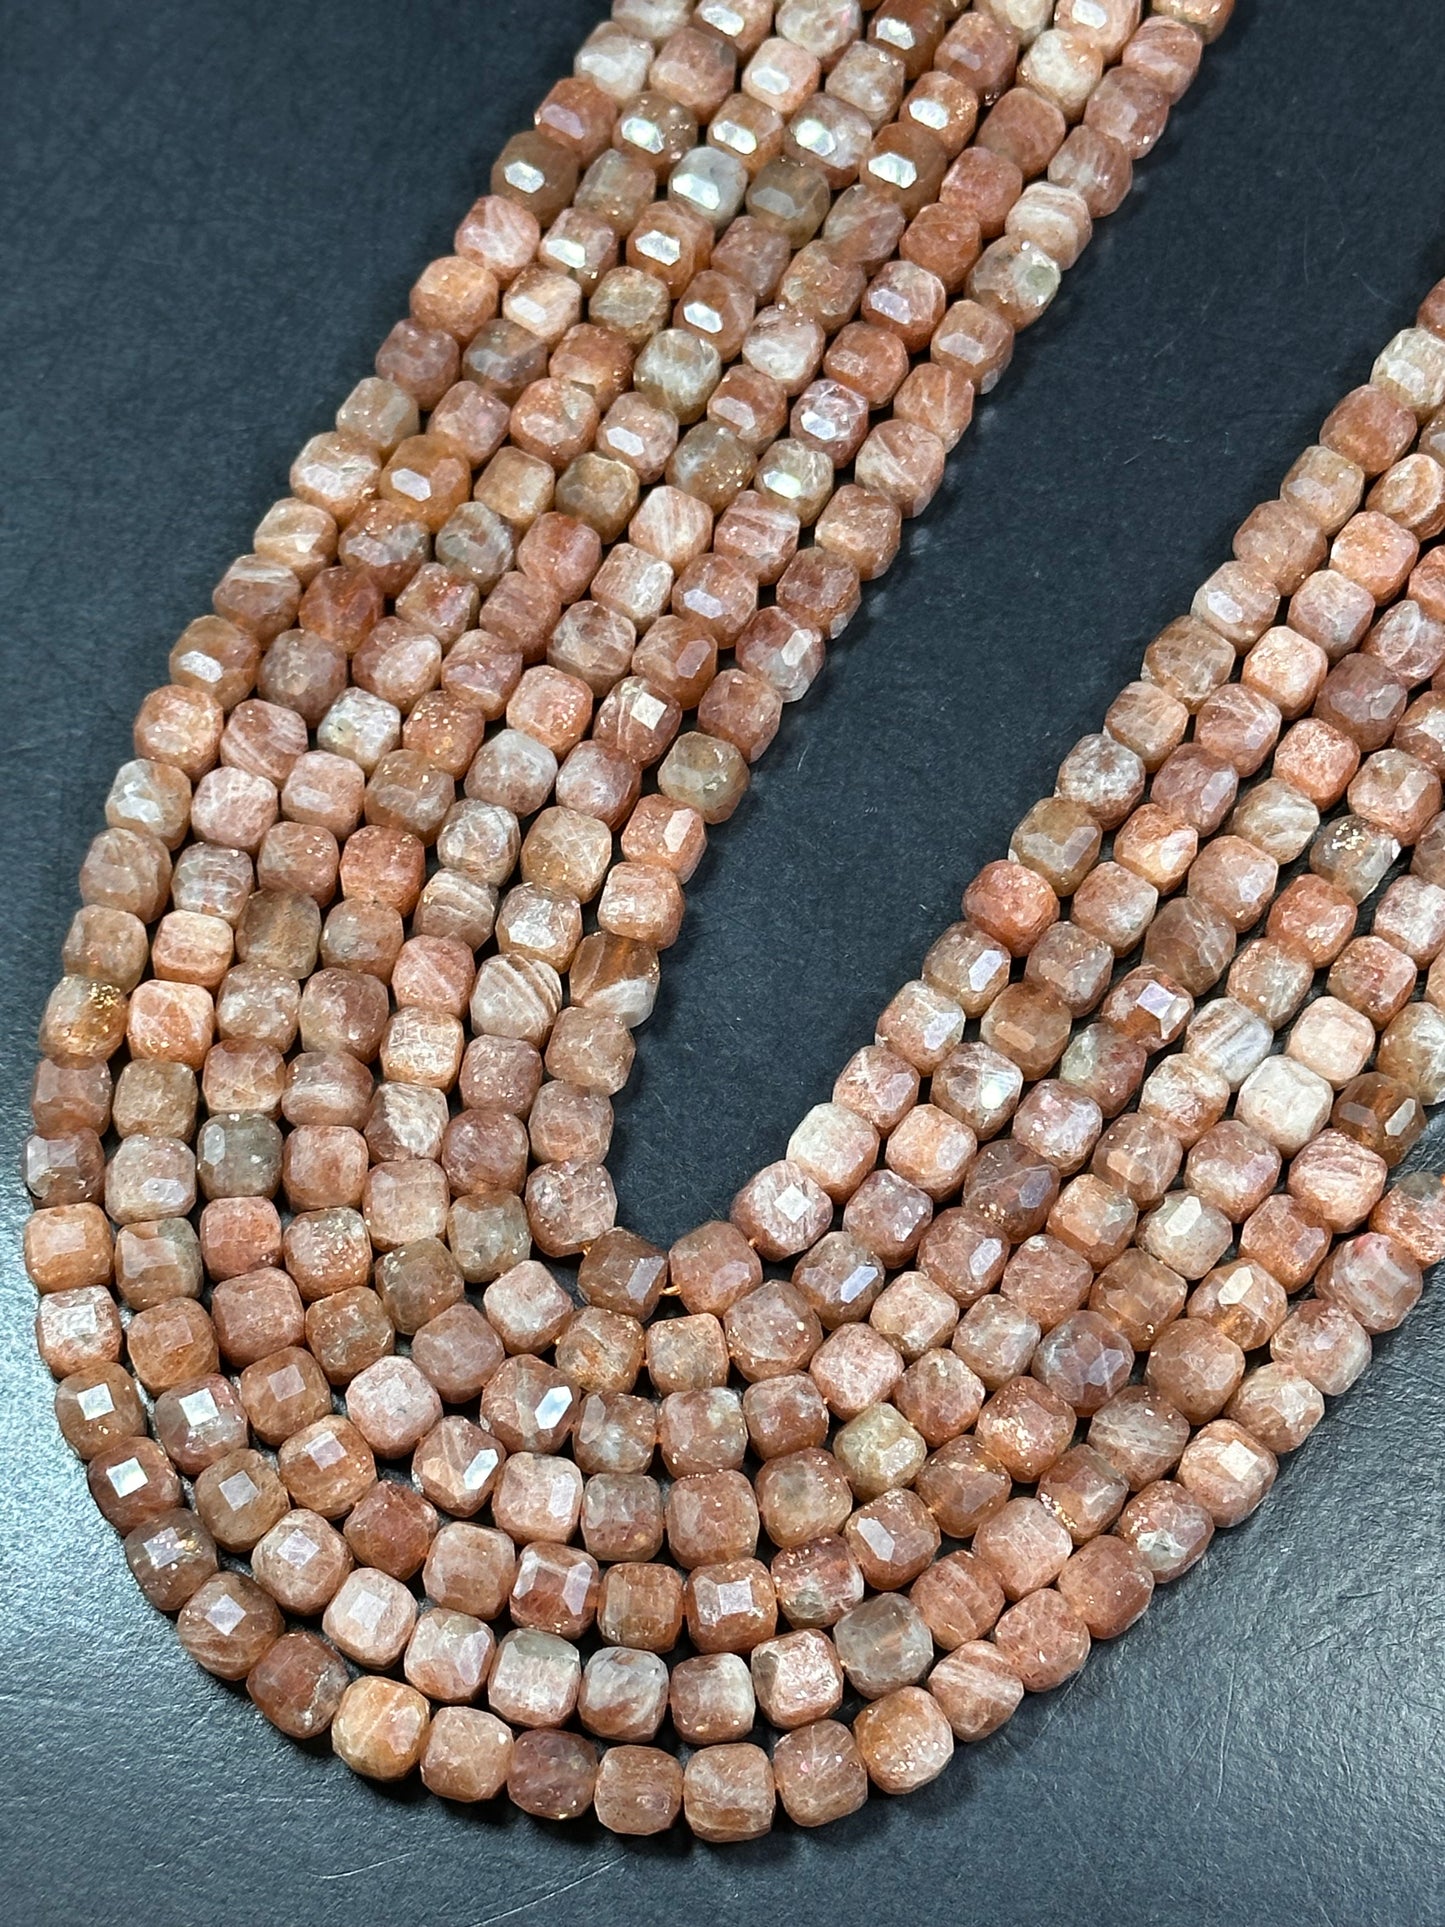 NATURAL Fire Sunstone Gemstone Bead Faceted 8mm Cube Shape, Gorgeous Peach Orange Color Loose Fire Sunstone Beads. 15.5" Full strand